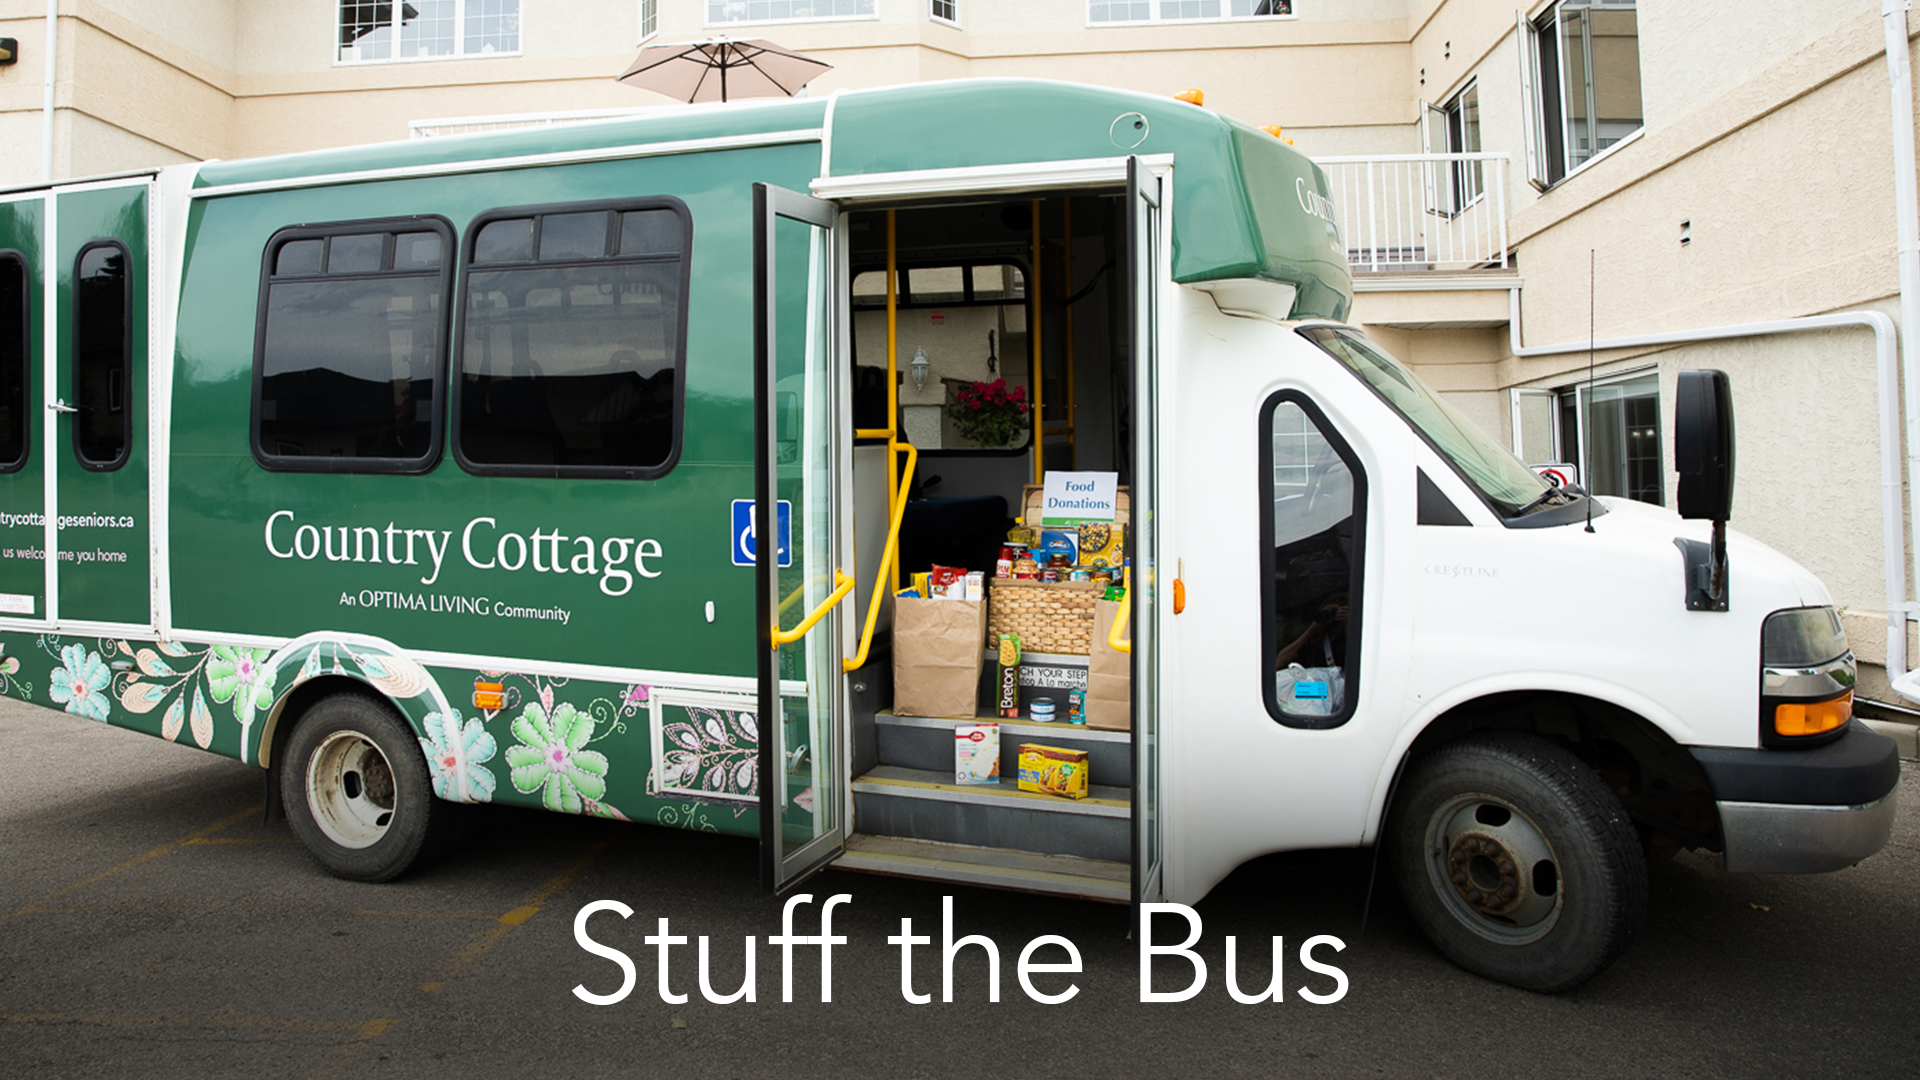 Country Cottage bus with food bank donations